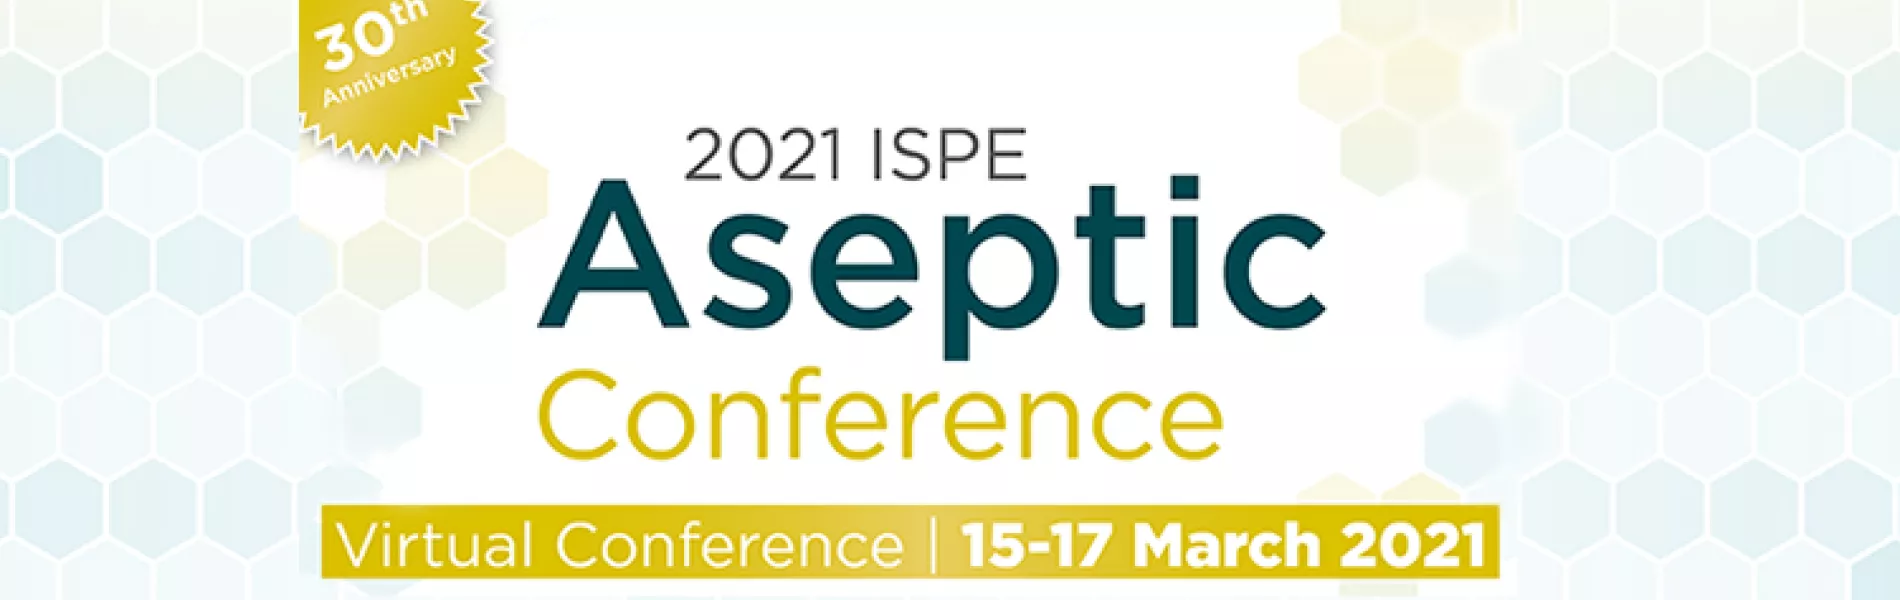  2021 ISPE Aseptic Conference